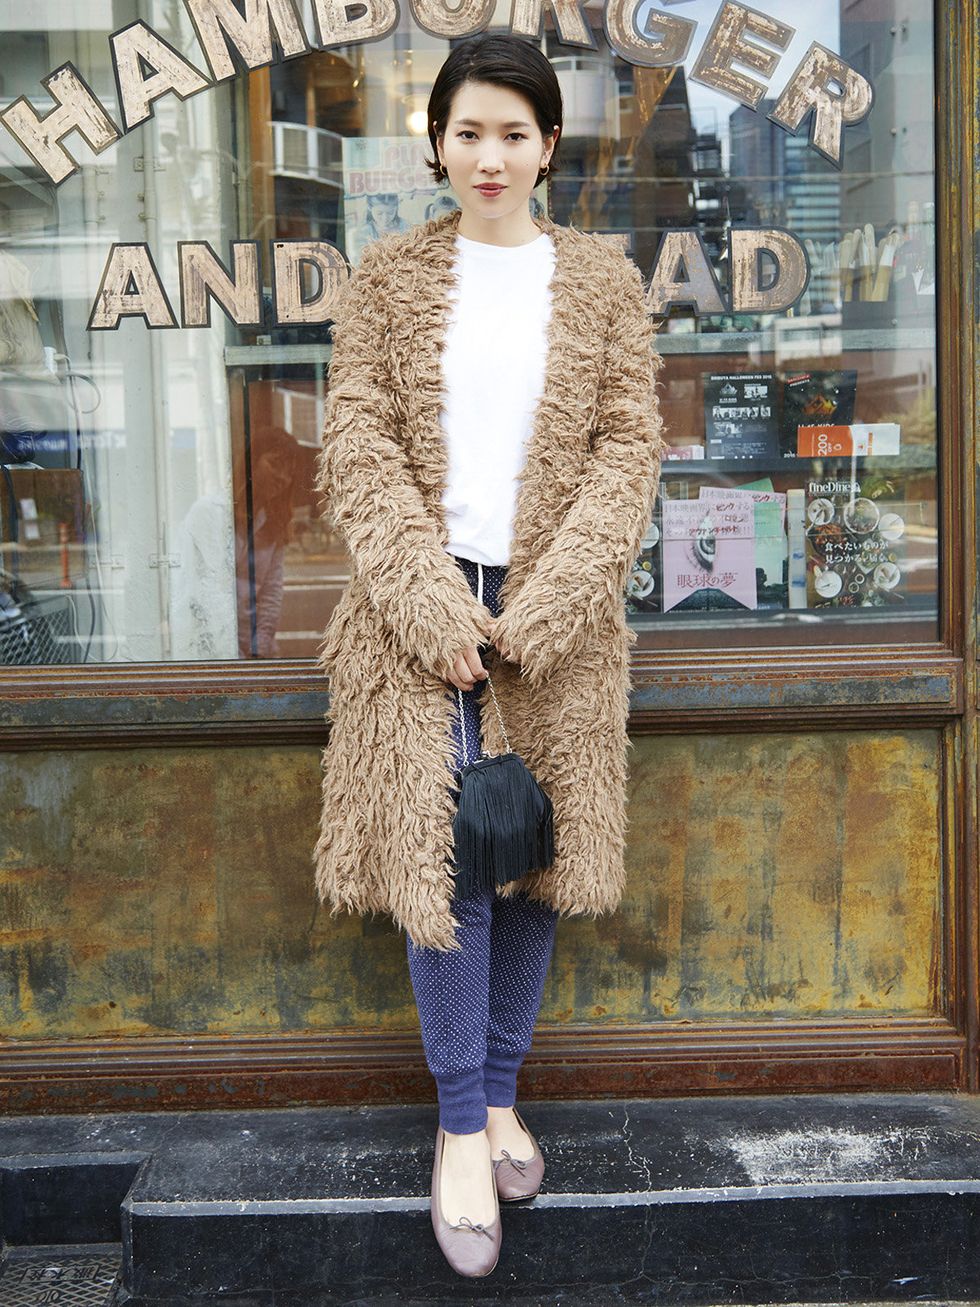 Sleeve, Shoulder, Textile, Outerwear, Style, Street fashion, Fur clothing, Fashion model, Natural material, Fur, 